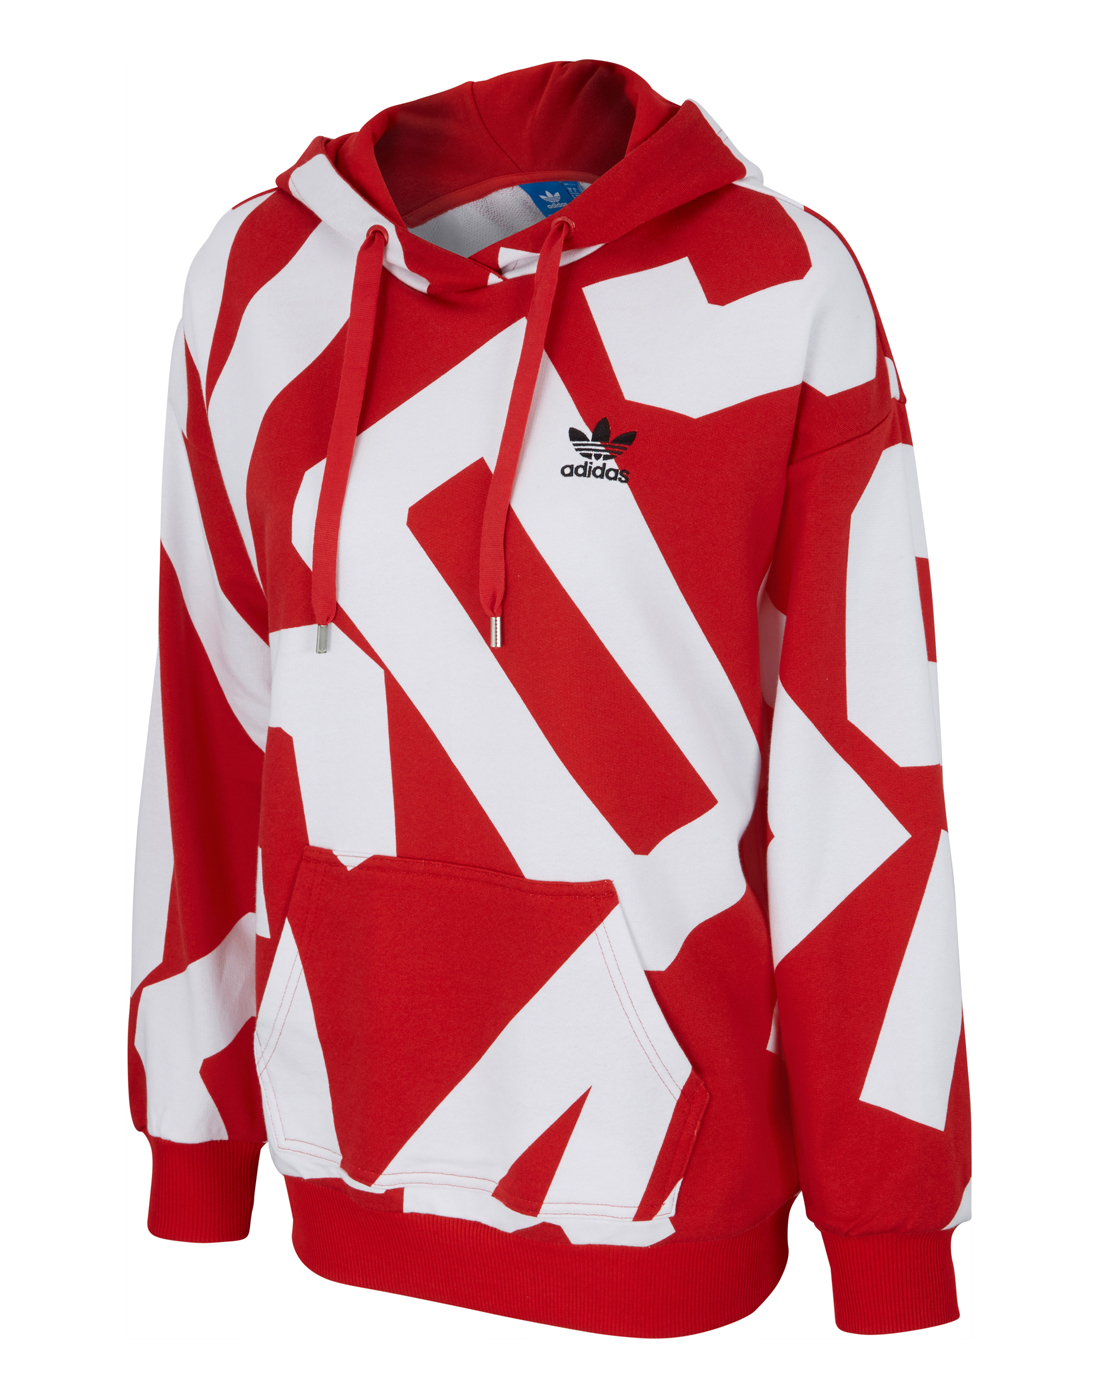 adidas Originals Womens Bold Age Hoody - Red | Life Style Sports UK